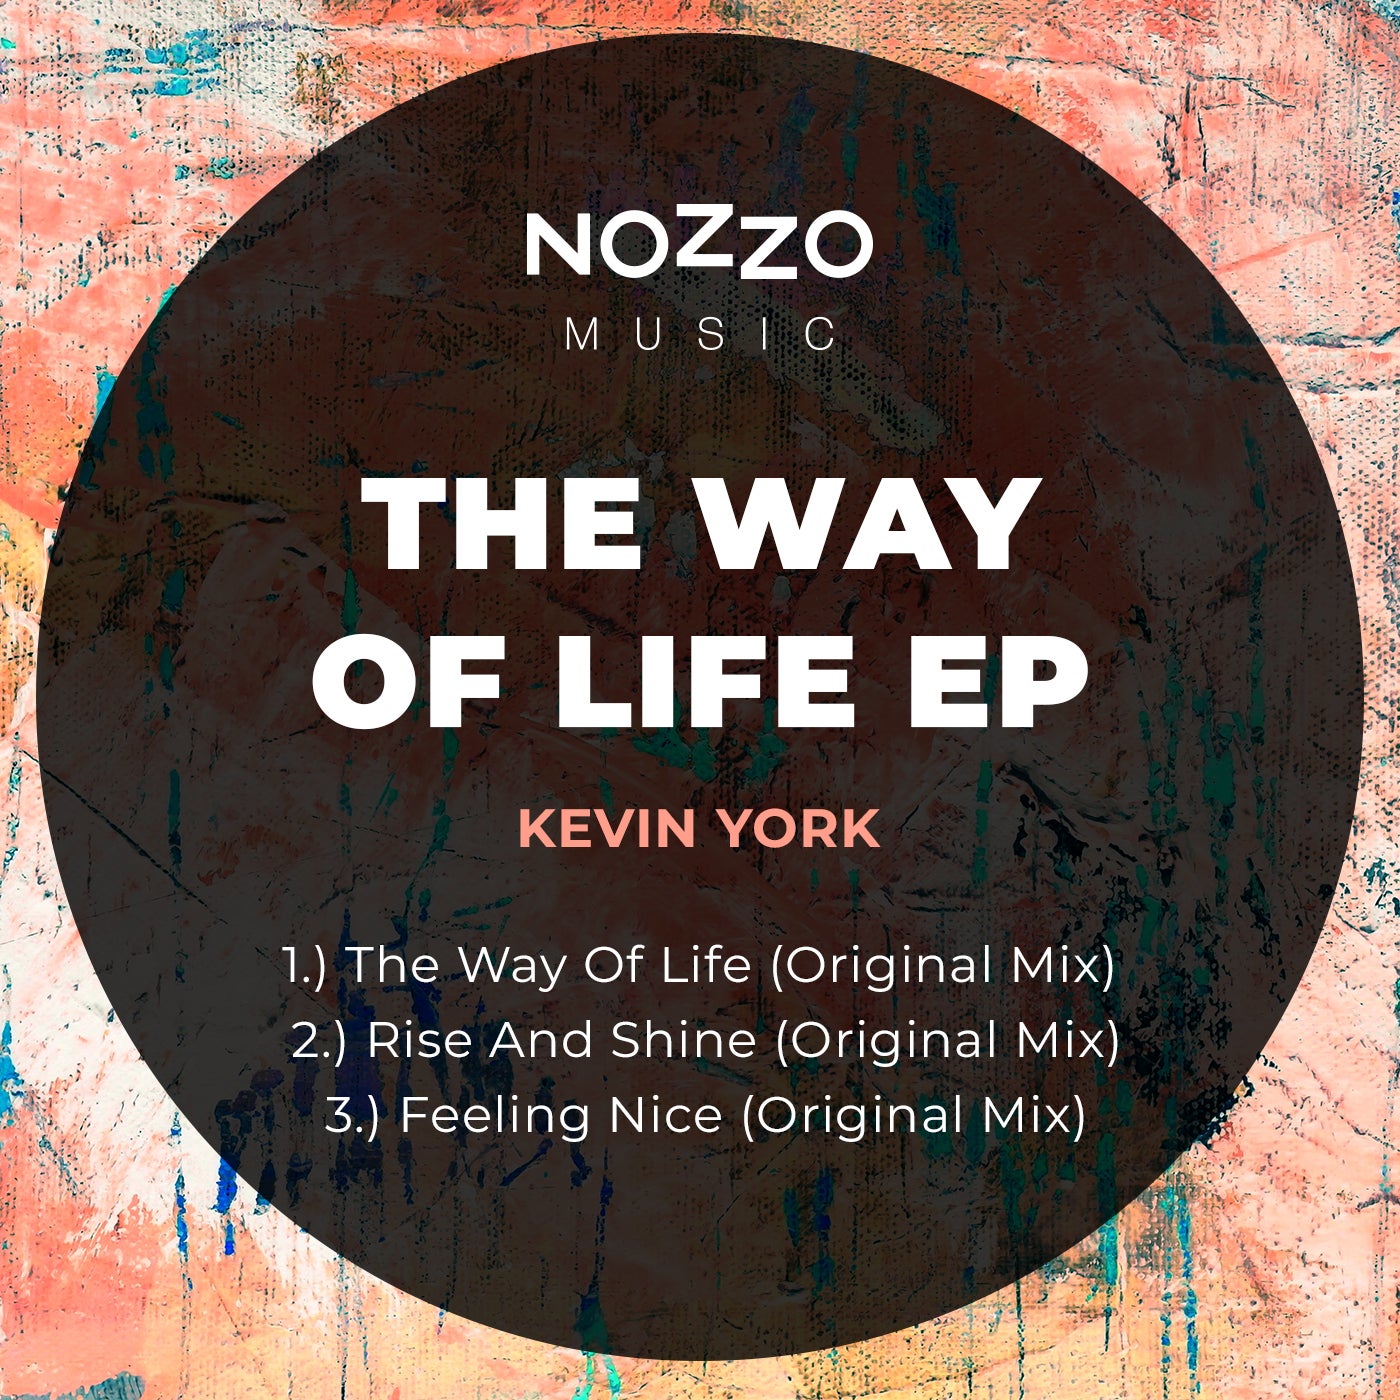 The Way Of Life EP